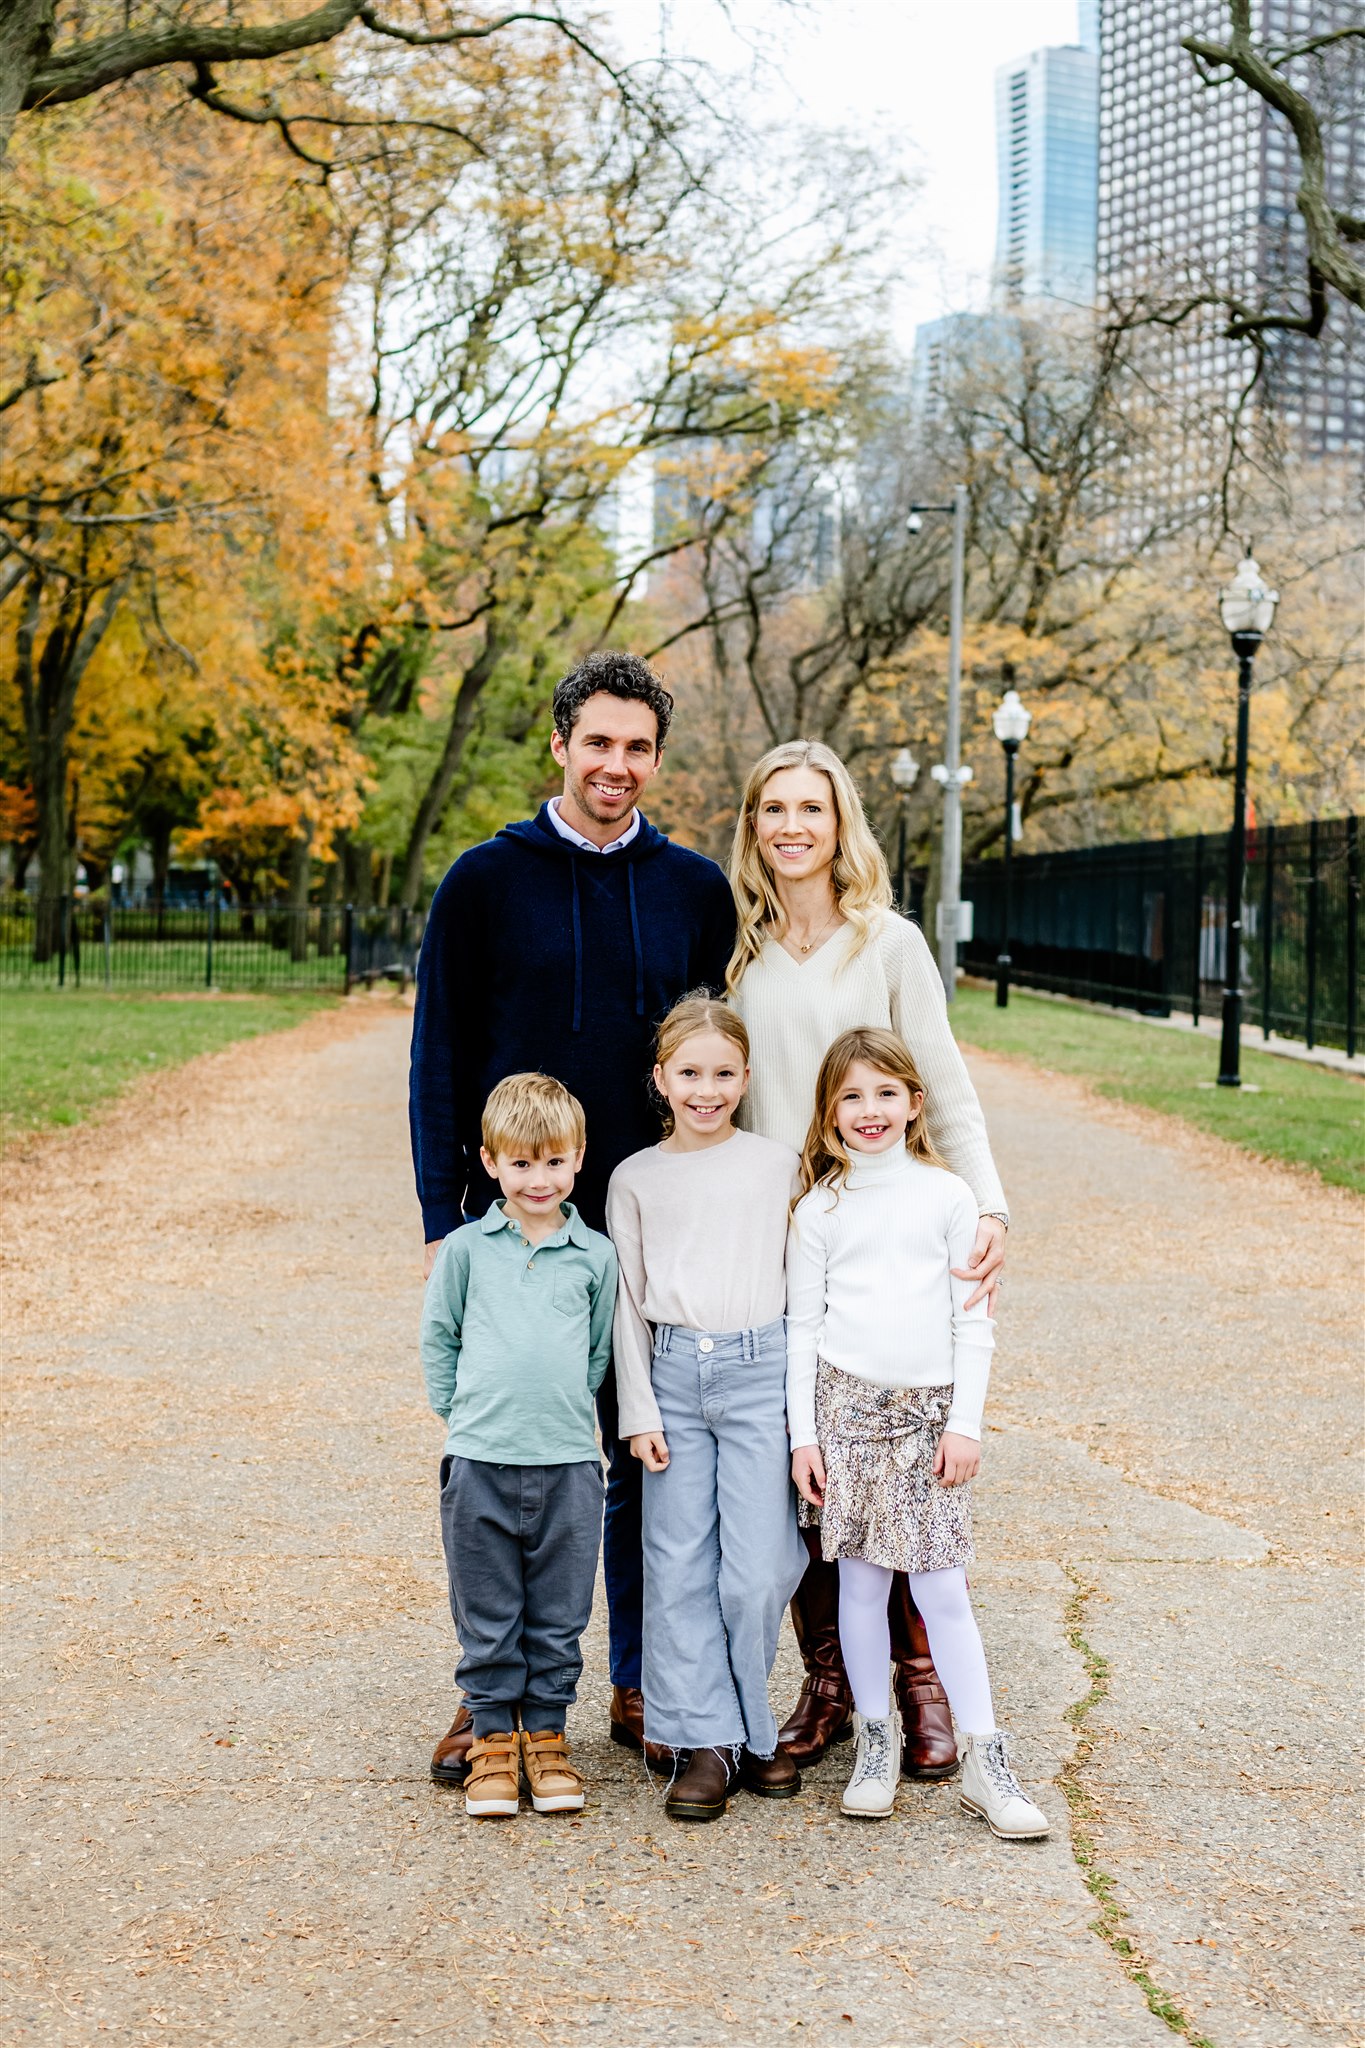 A mom and dad stand in a metropolitan park path behind their three young children